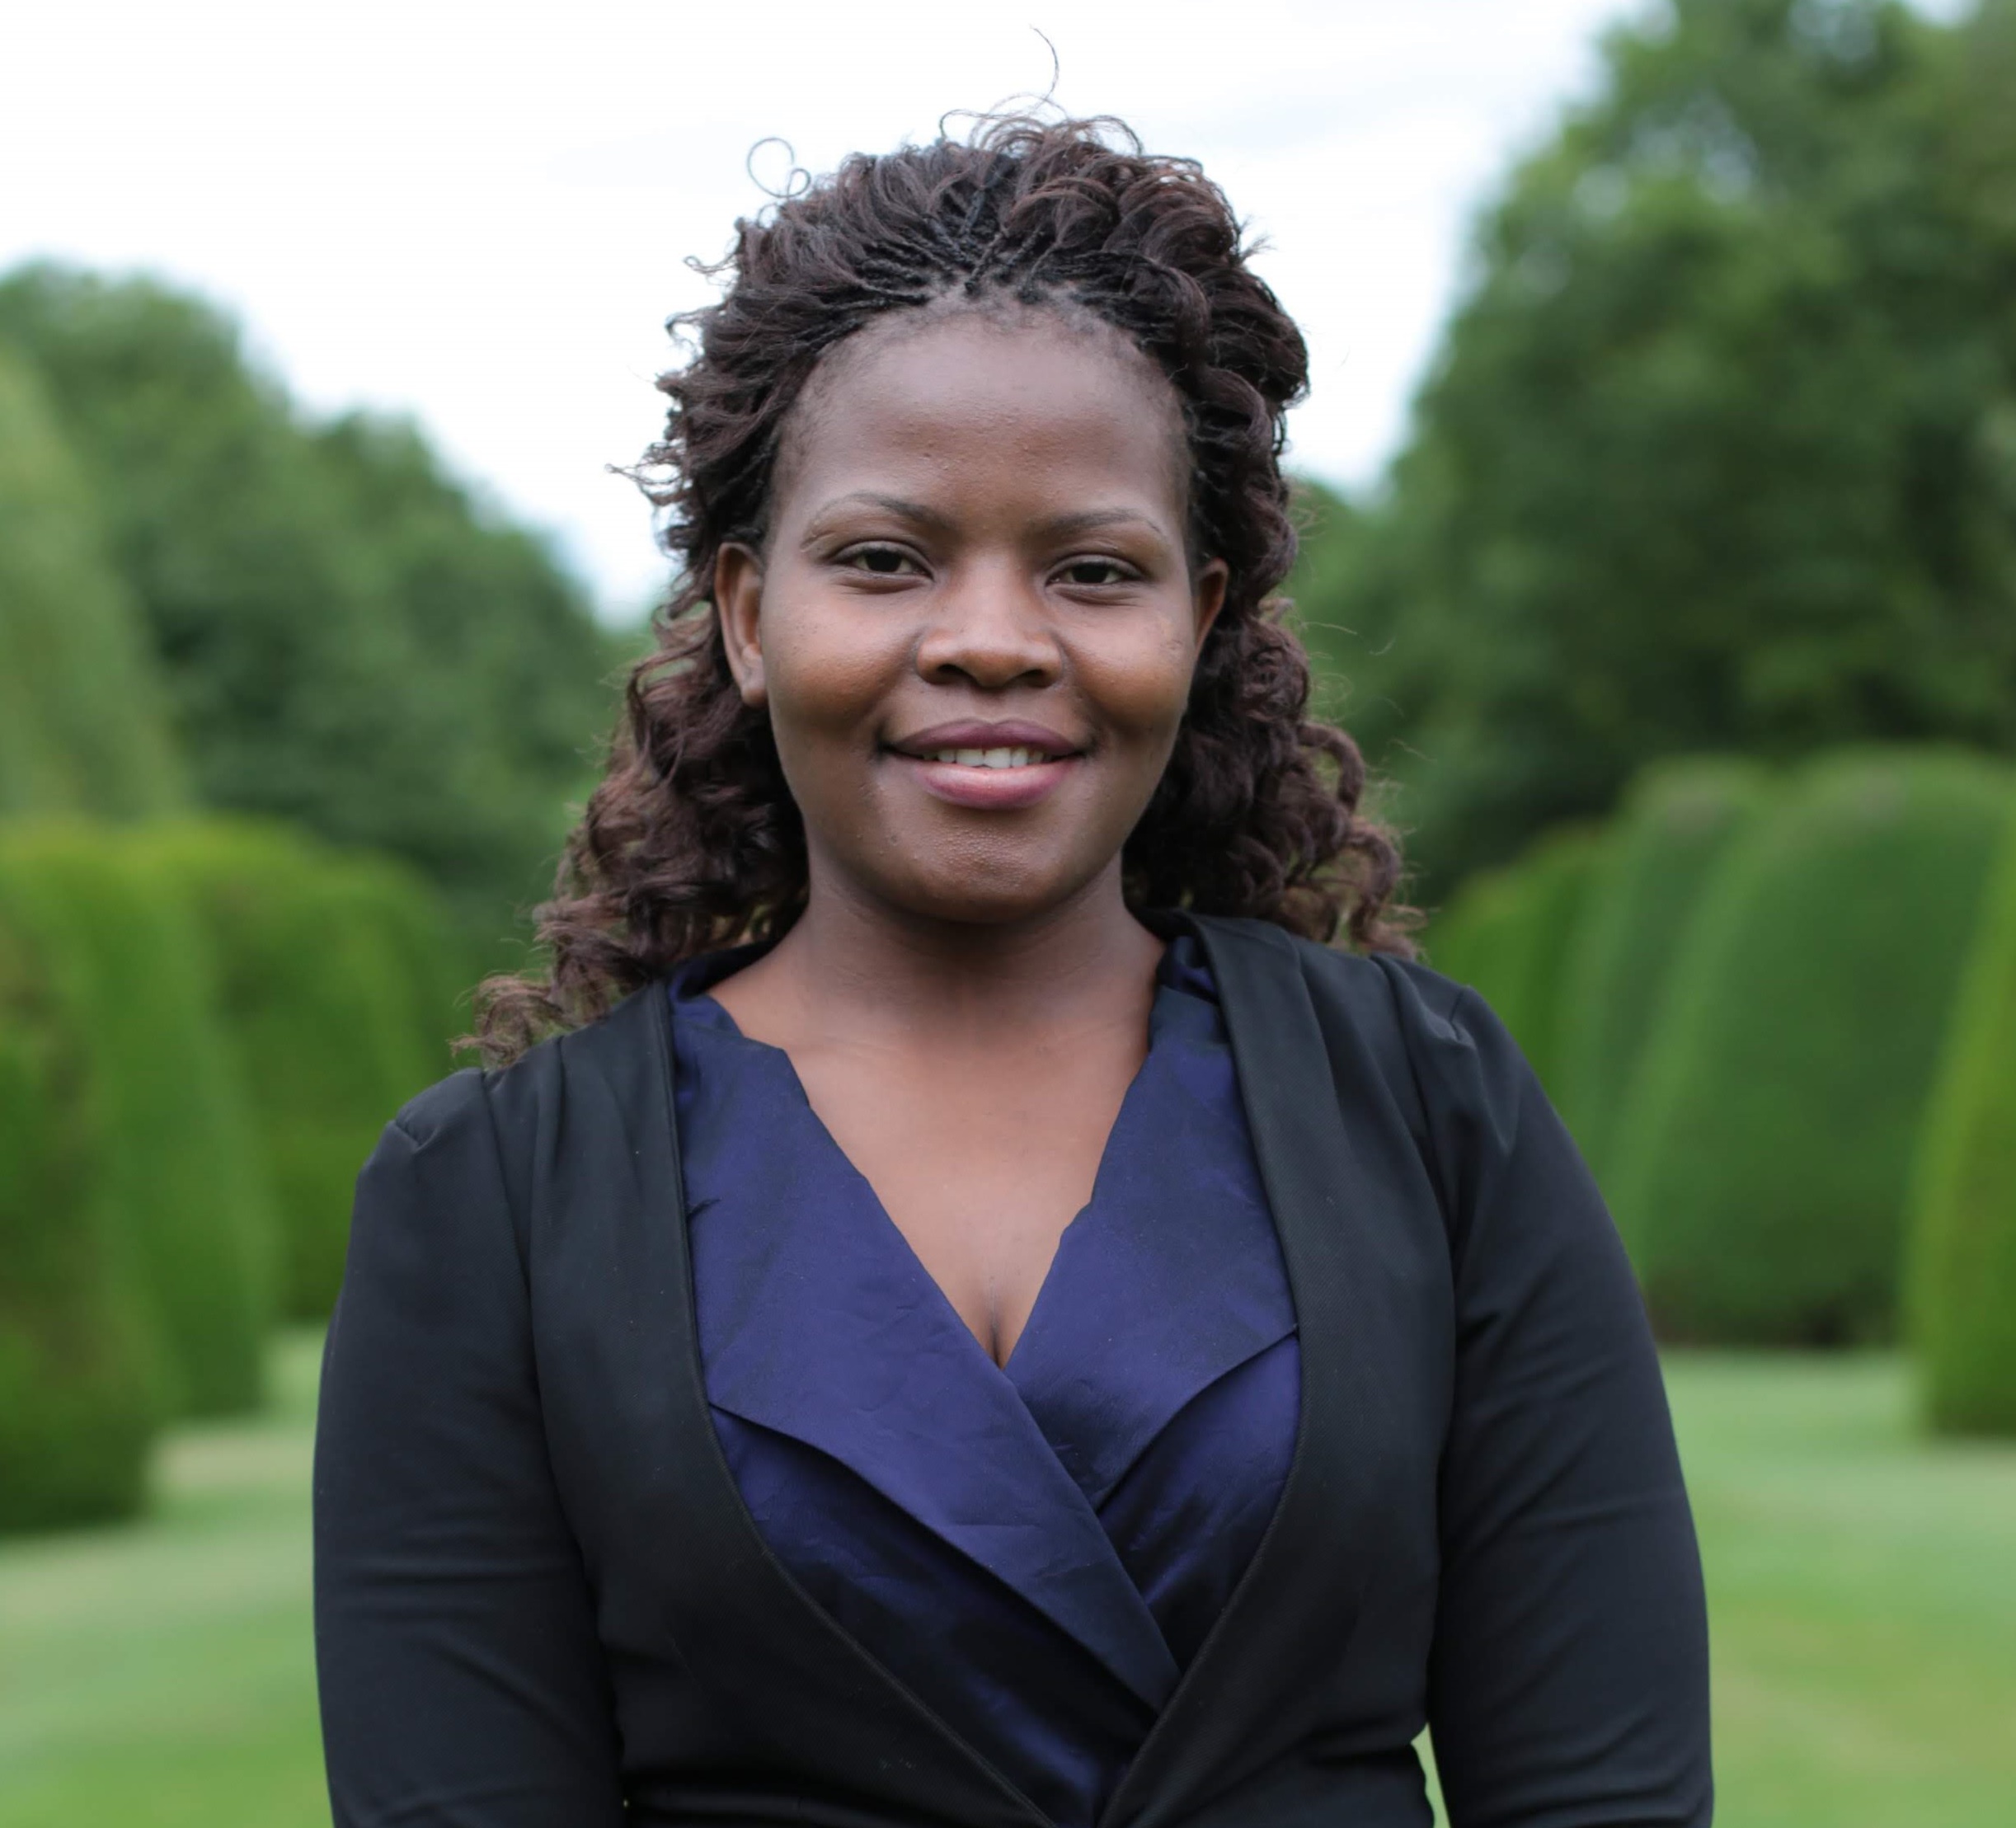 Chikondi Violet Mlozi 2018 Queen's Young Leader from Malawi